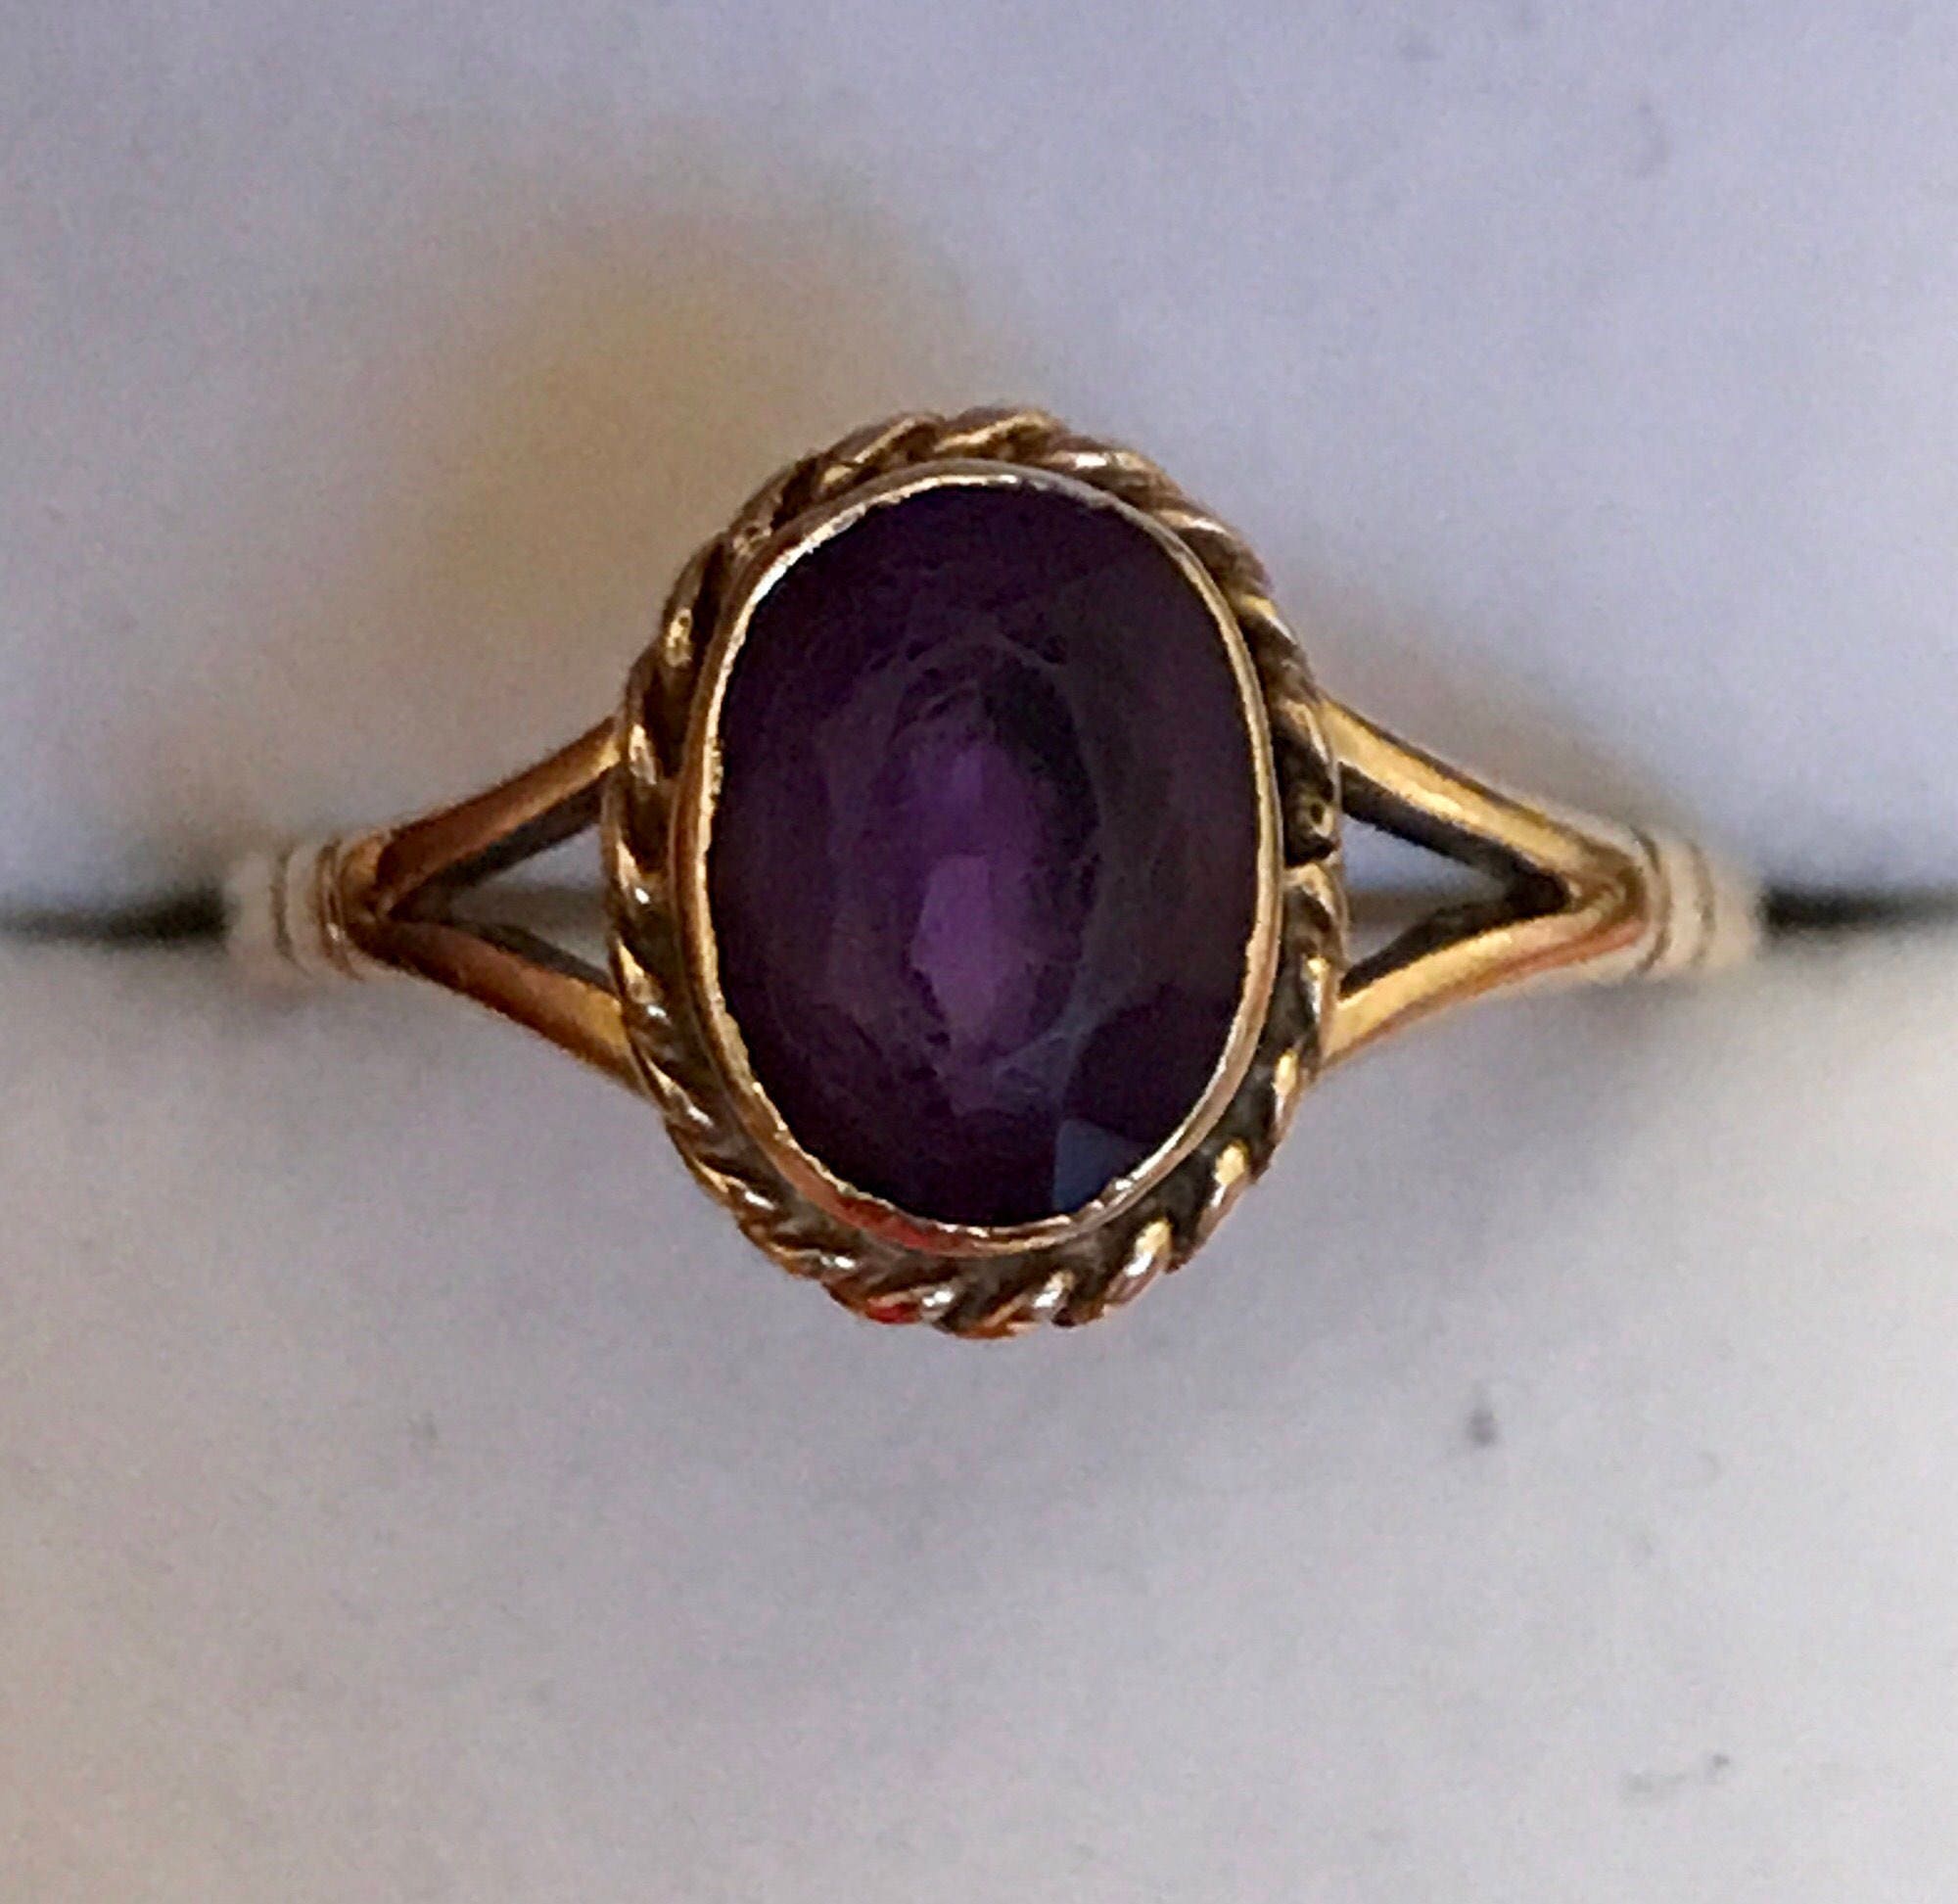 Super vintage 9ct gold Amethyst solitaire ring - 1988 **Reserved for ...